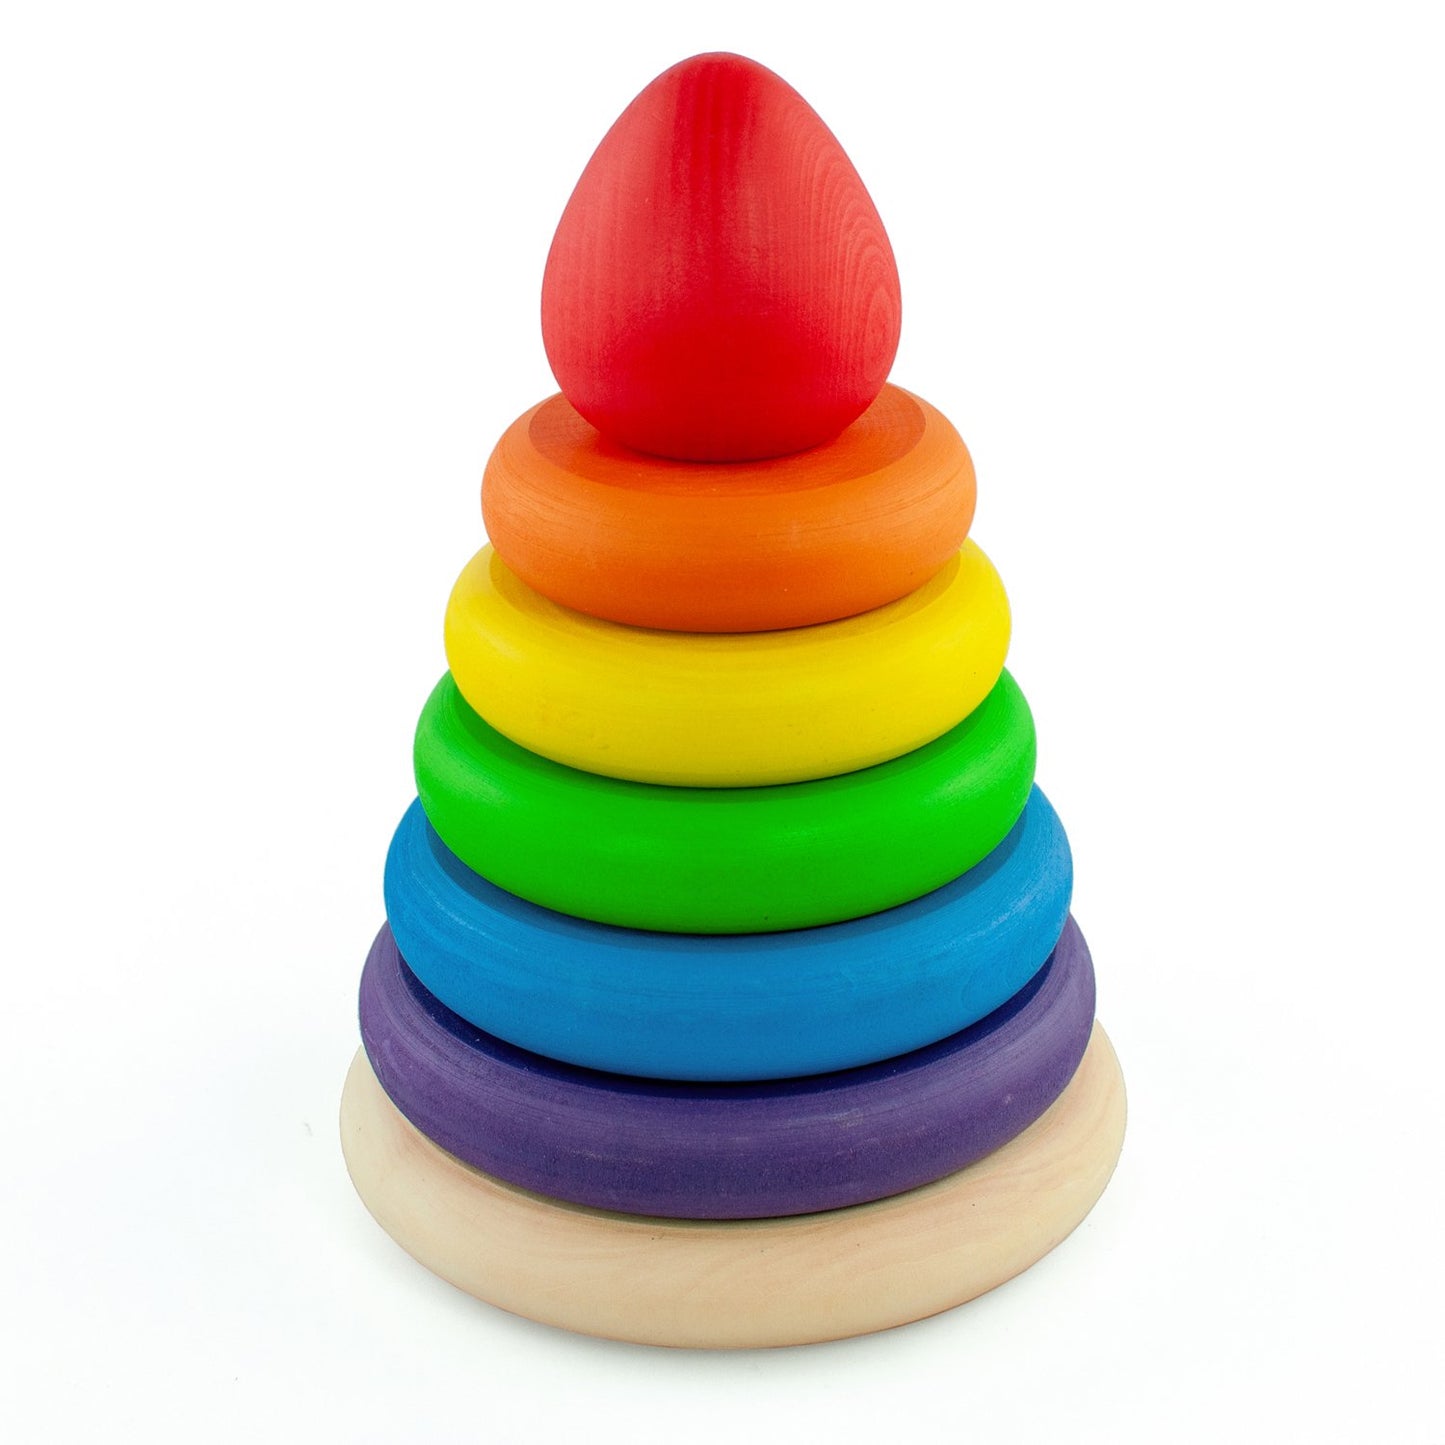 Ulanik Rings Stacker Toddler Montessori Toys for 1 Year Old + Wooden Stacking Rings Rainbow Stacker Game for Color and Size Sorting